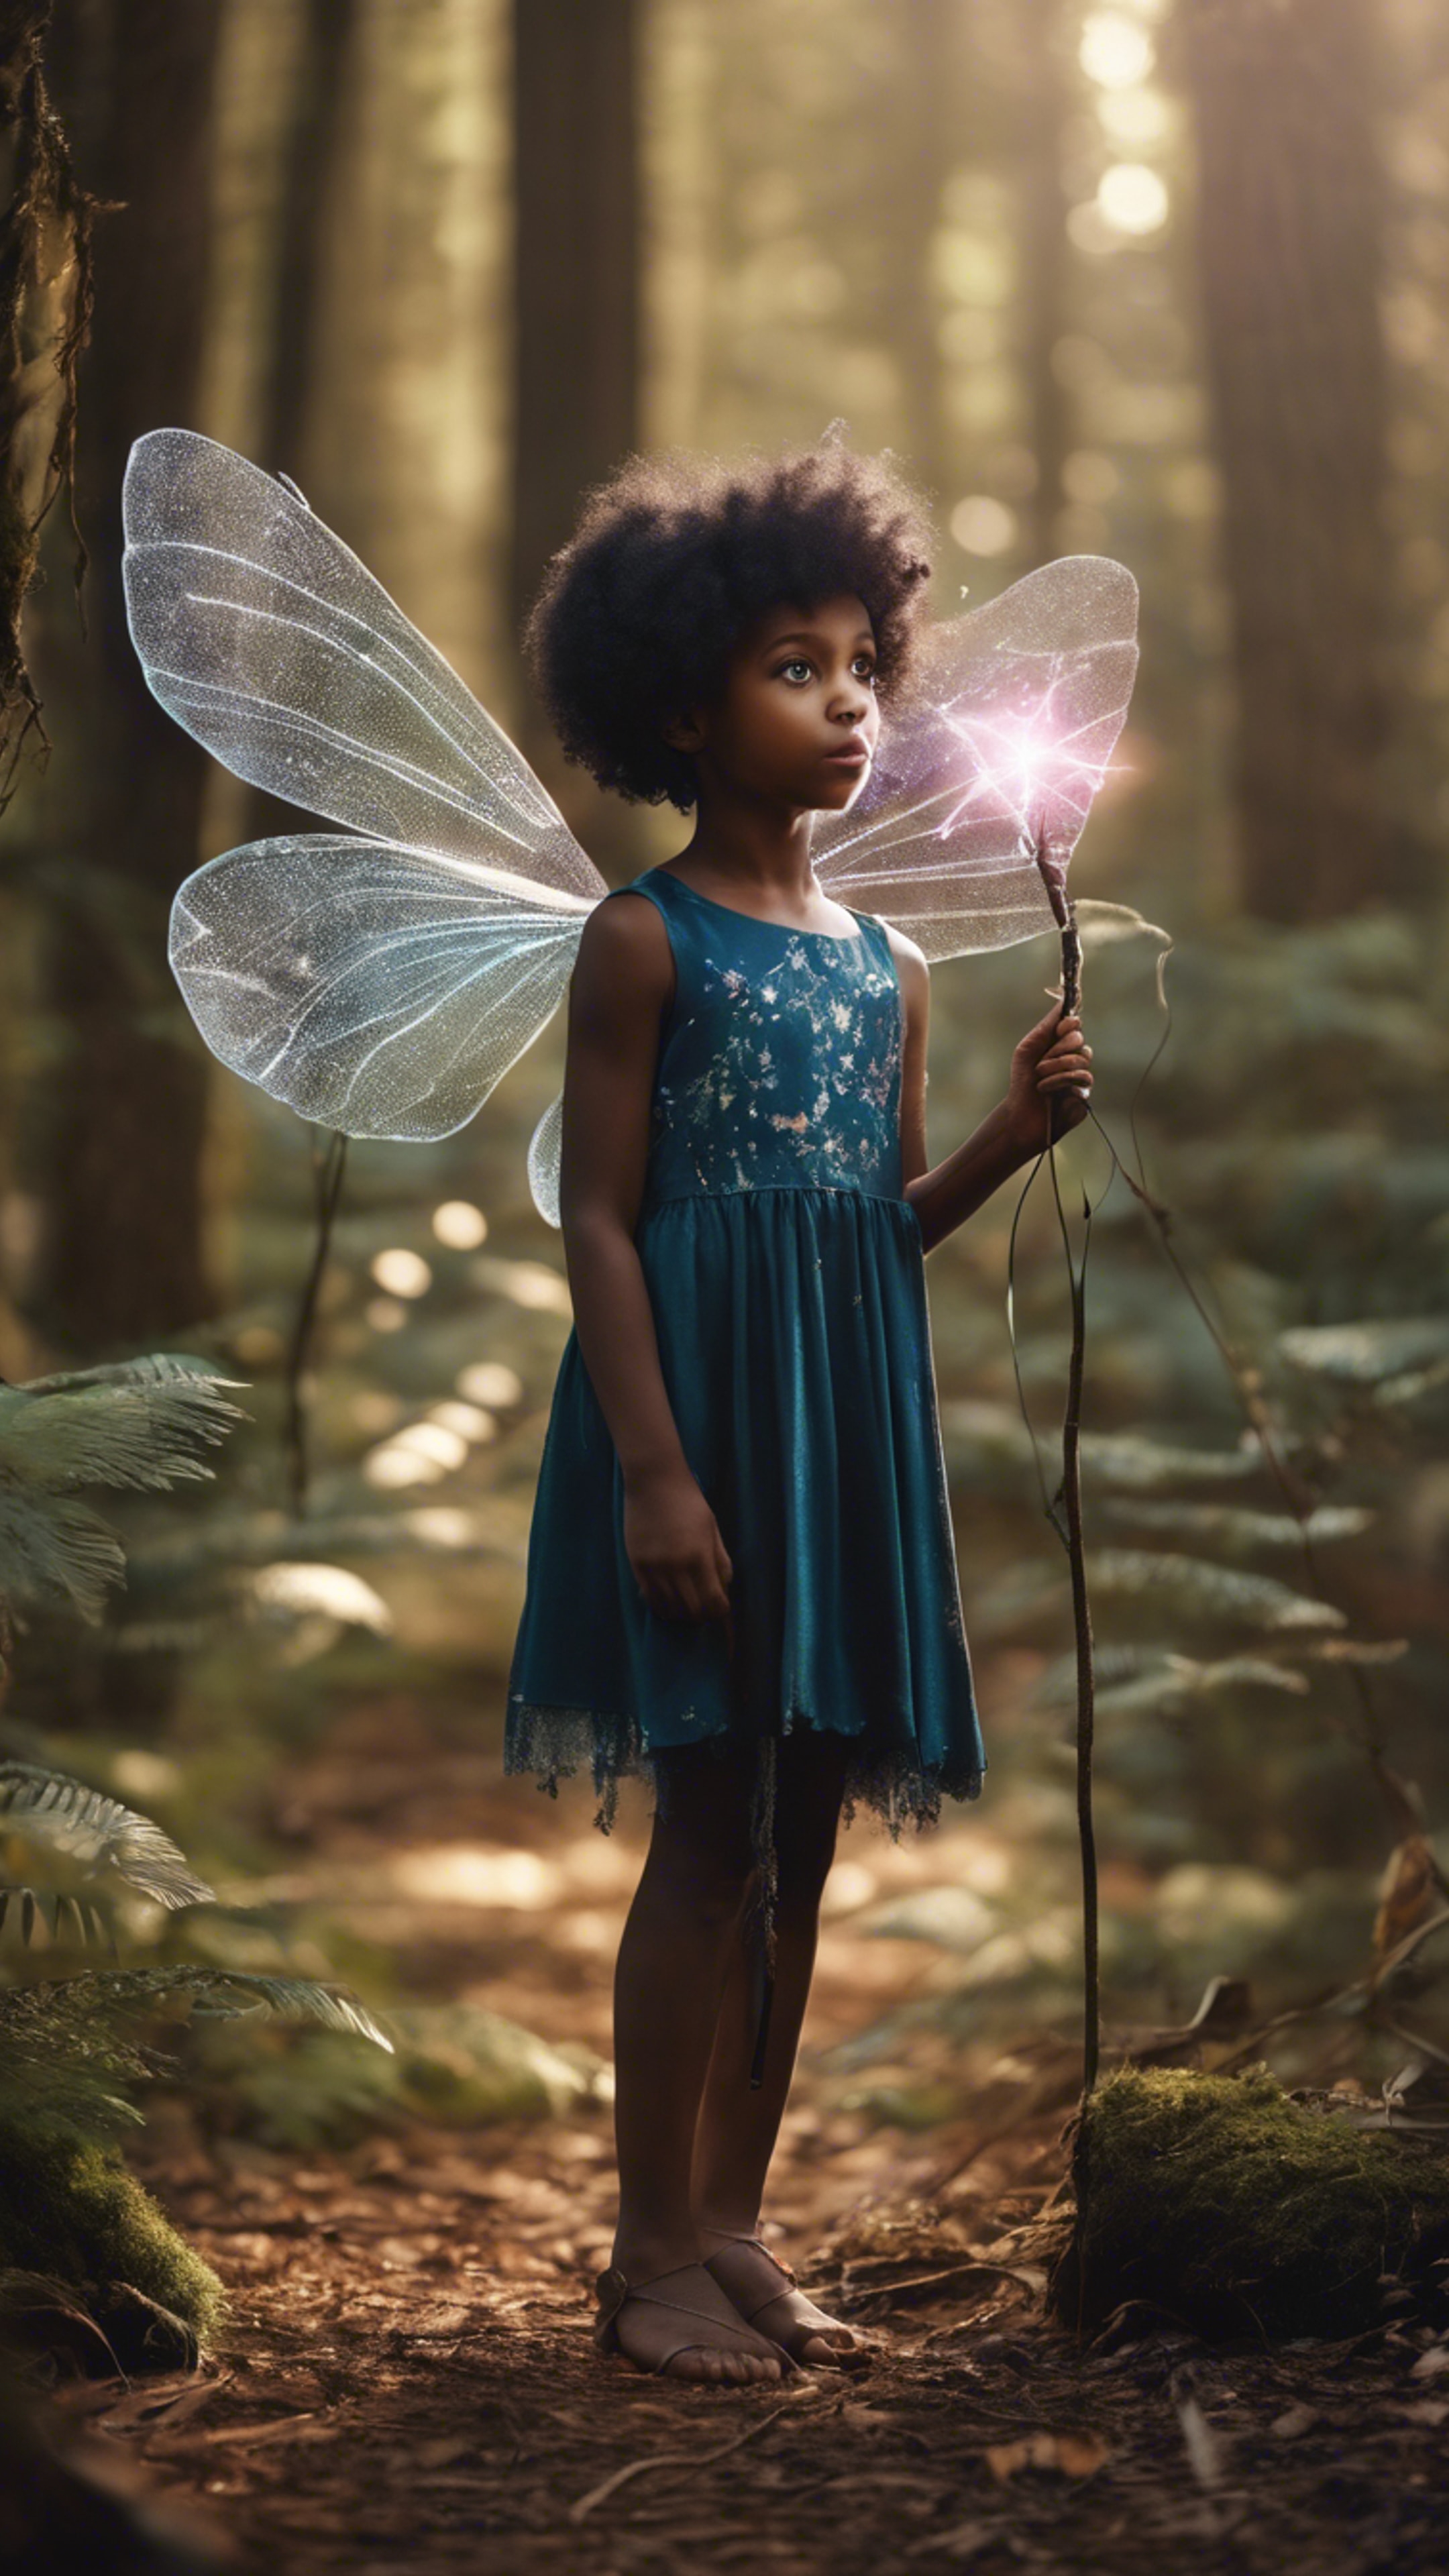 A cute image of a black girl wearing fairy wings, holding a magic wand in a mystical forest. ورق الجدران[6c77347a4892474c928d]